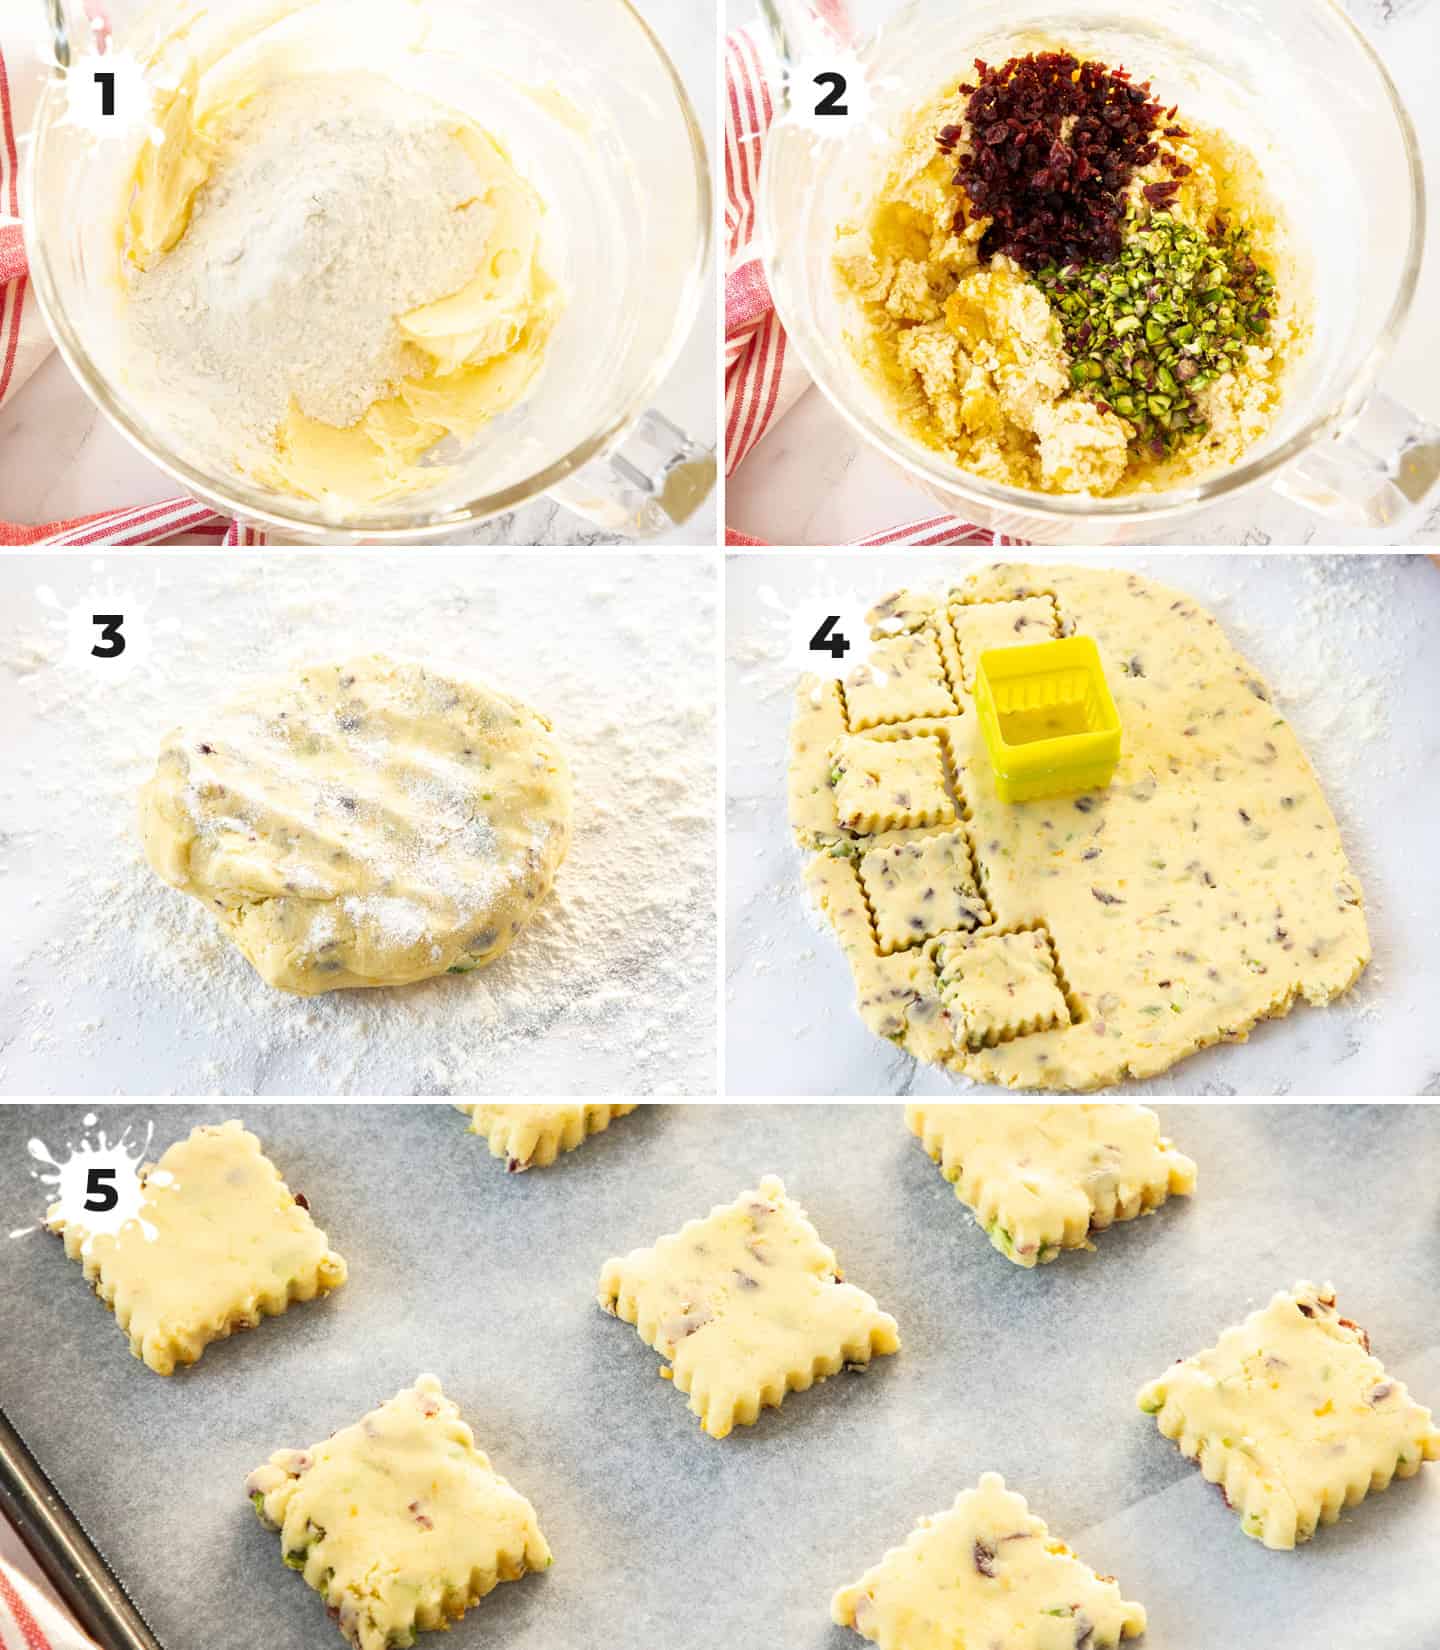 A collage of 5 images showing how to make the cookies.